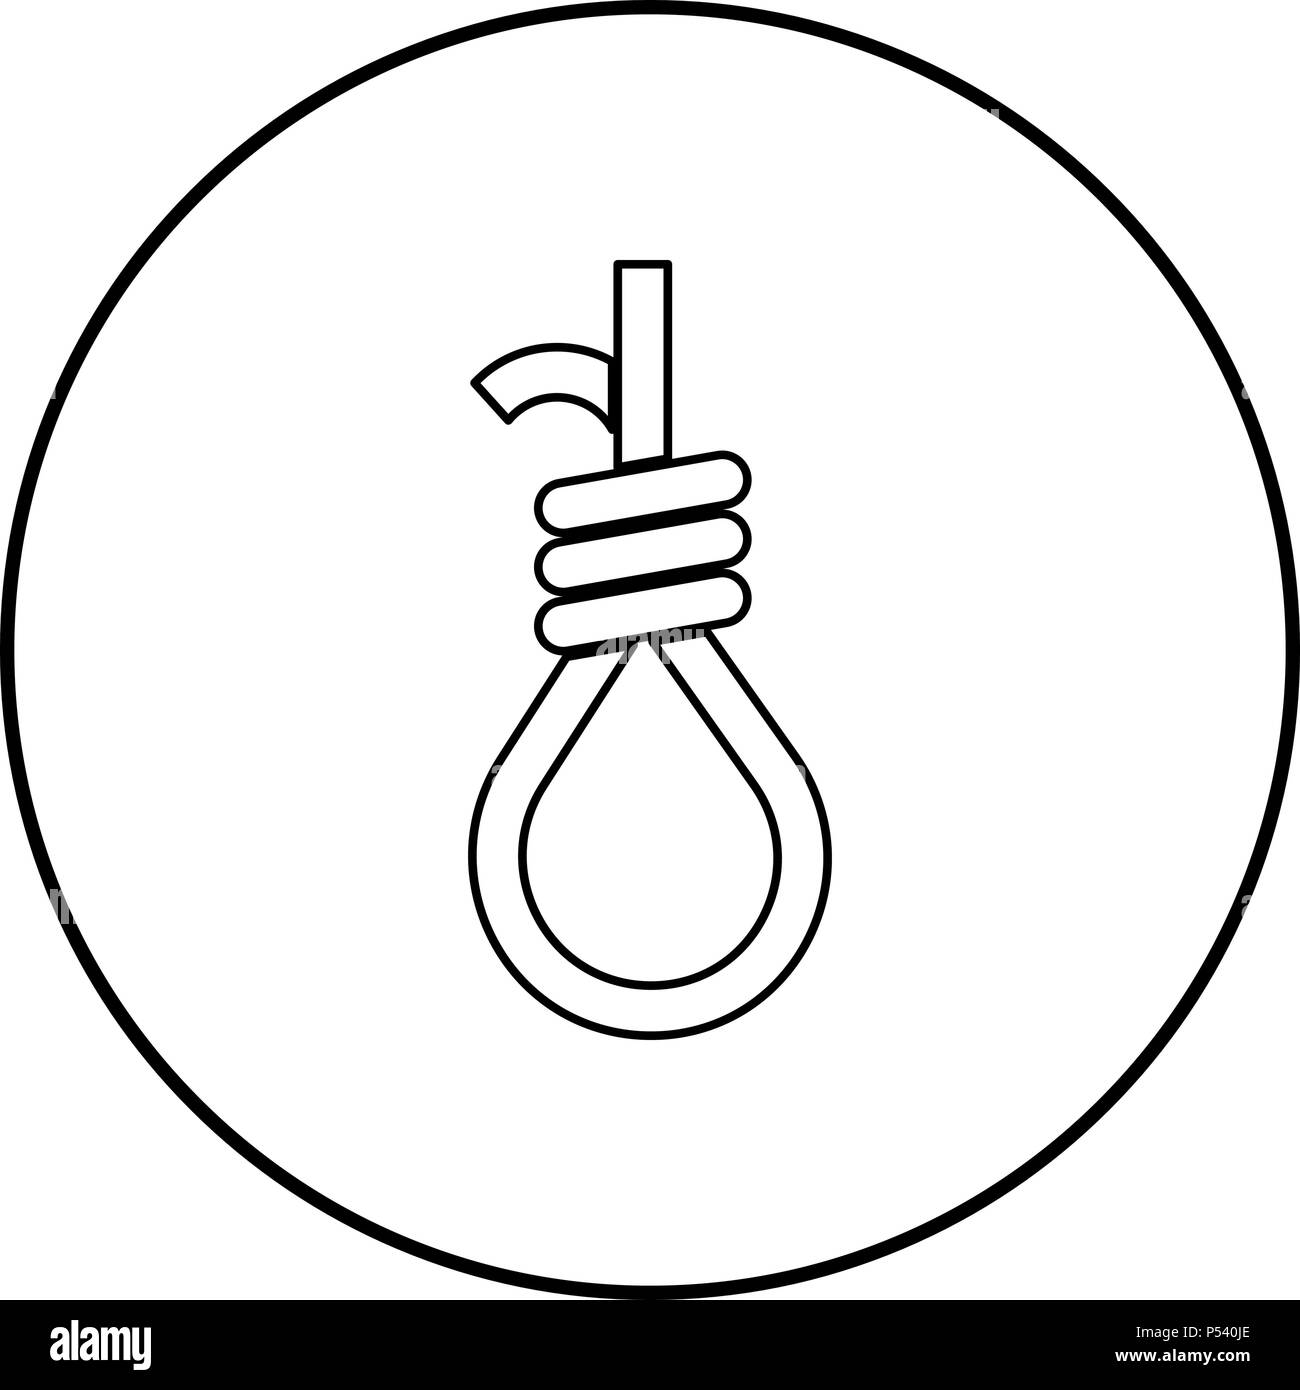 Gallows with rope noose icon black color in circle round outline Stock Vector